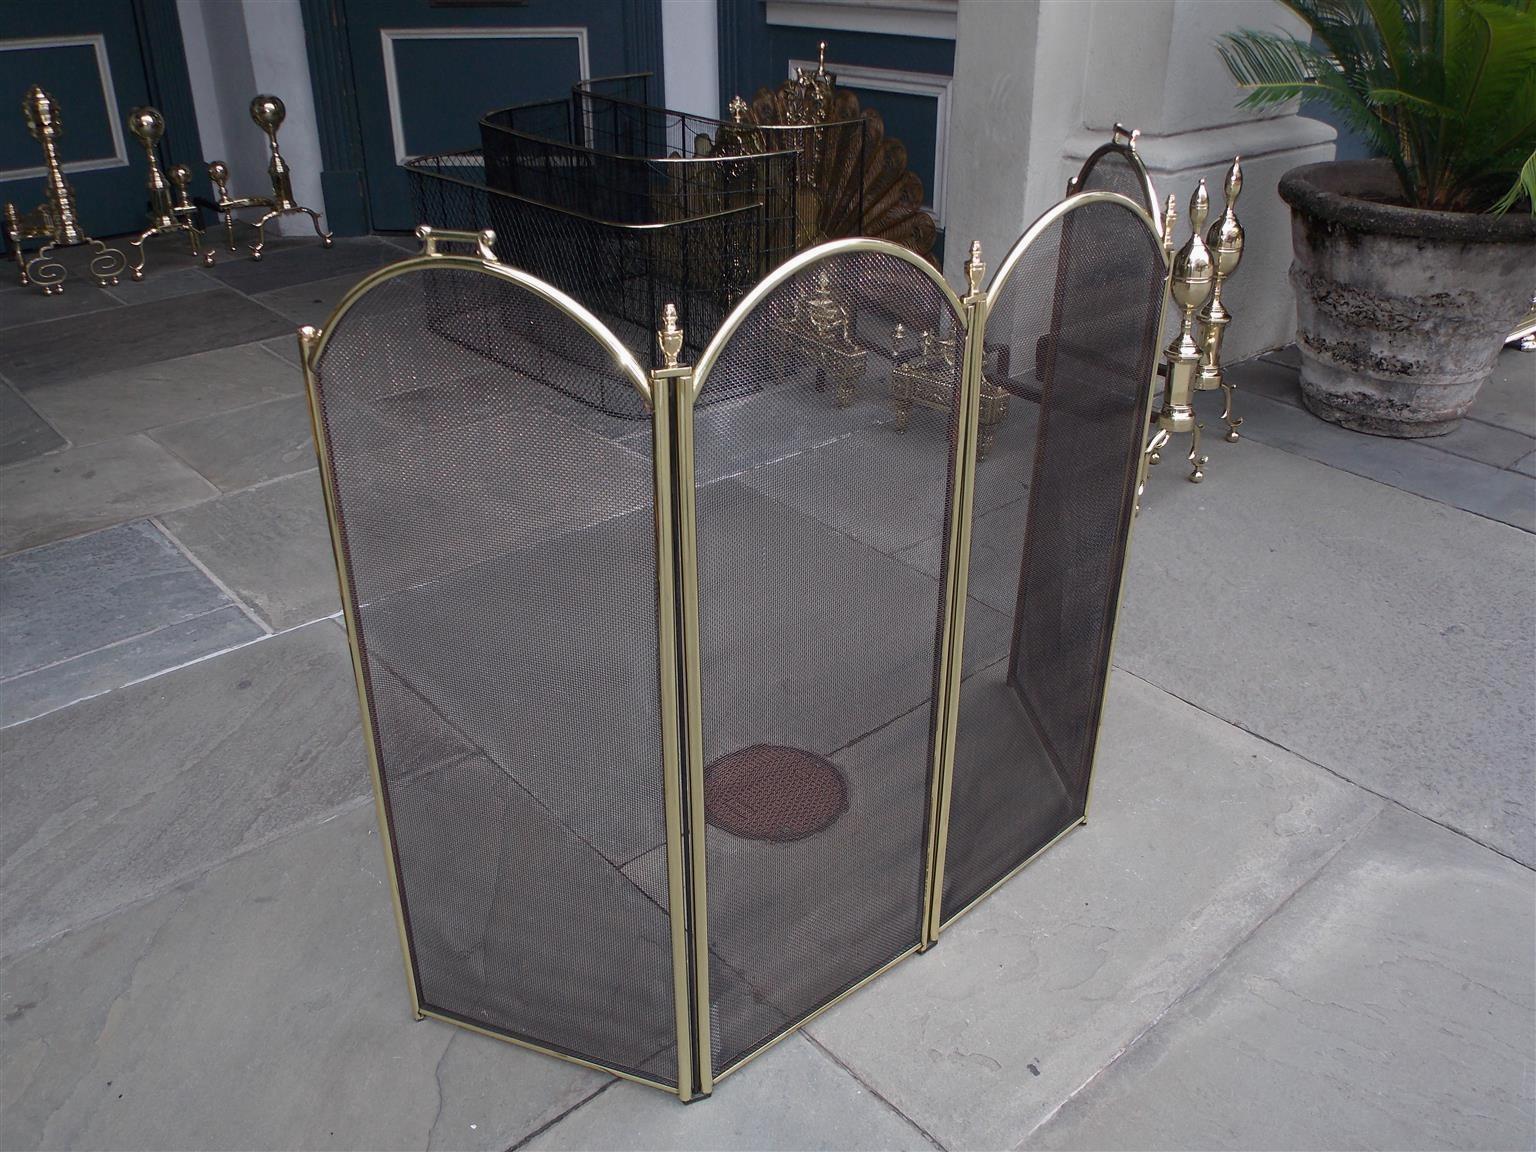 American brass and wire folding four-panel arched fireplace screen with flanking side handles and urn finials, Late 19th century.